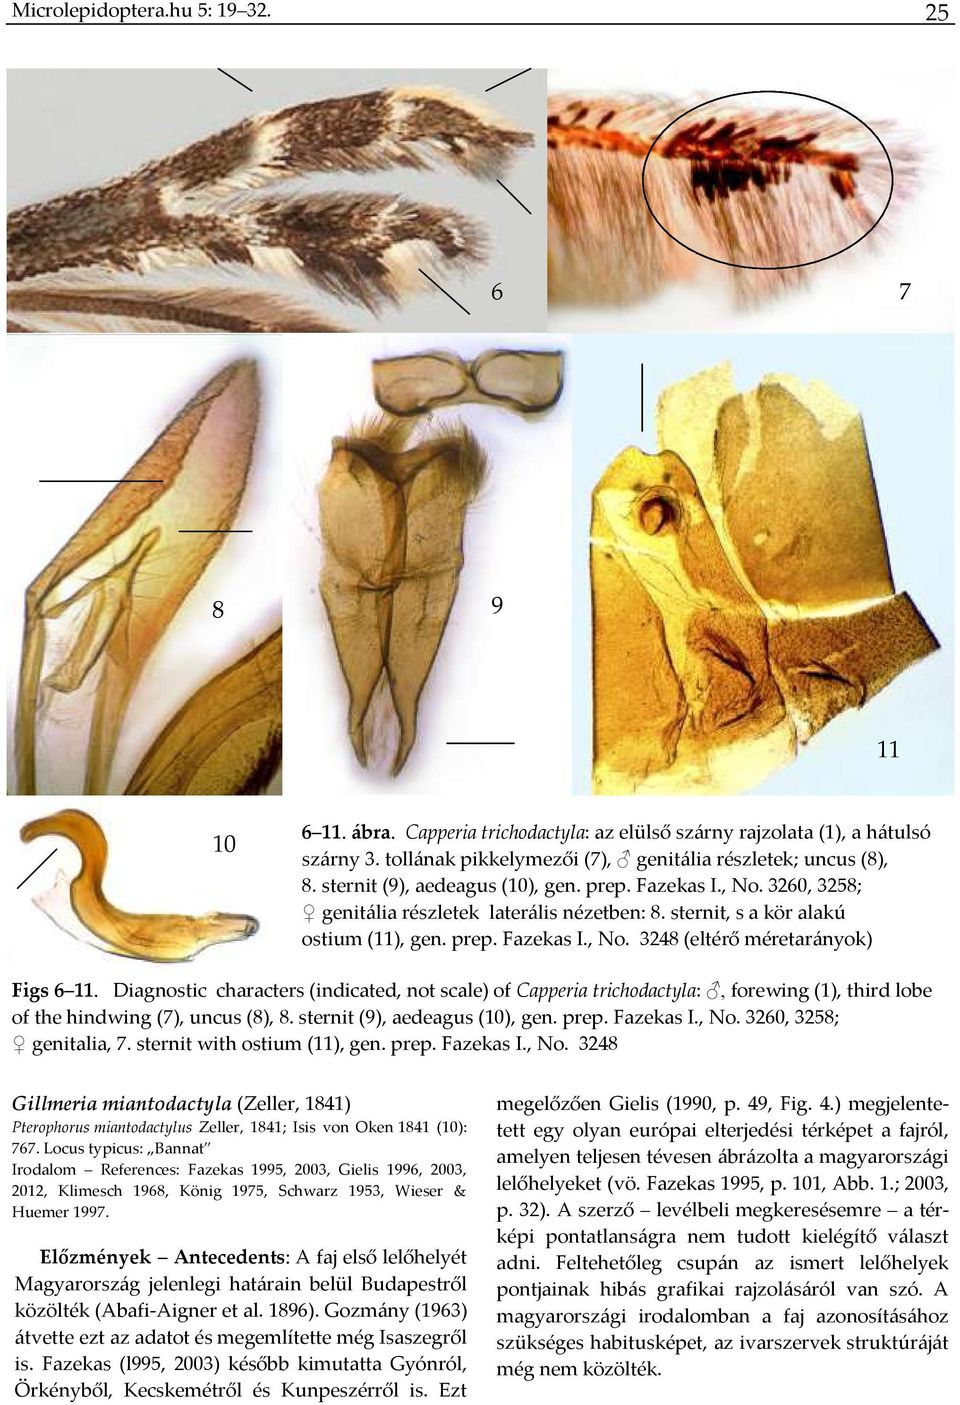 Diagnostic characters (indicated, not scale) of Capperia trichodactyla:, forewing (1), third lobe of the hindwing (7), uncus (8), 8. sternit (9), aedeagus (10), gen. prep. Fazekas I., No.